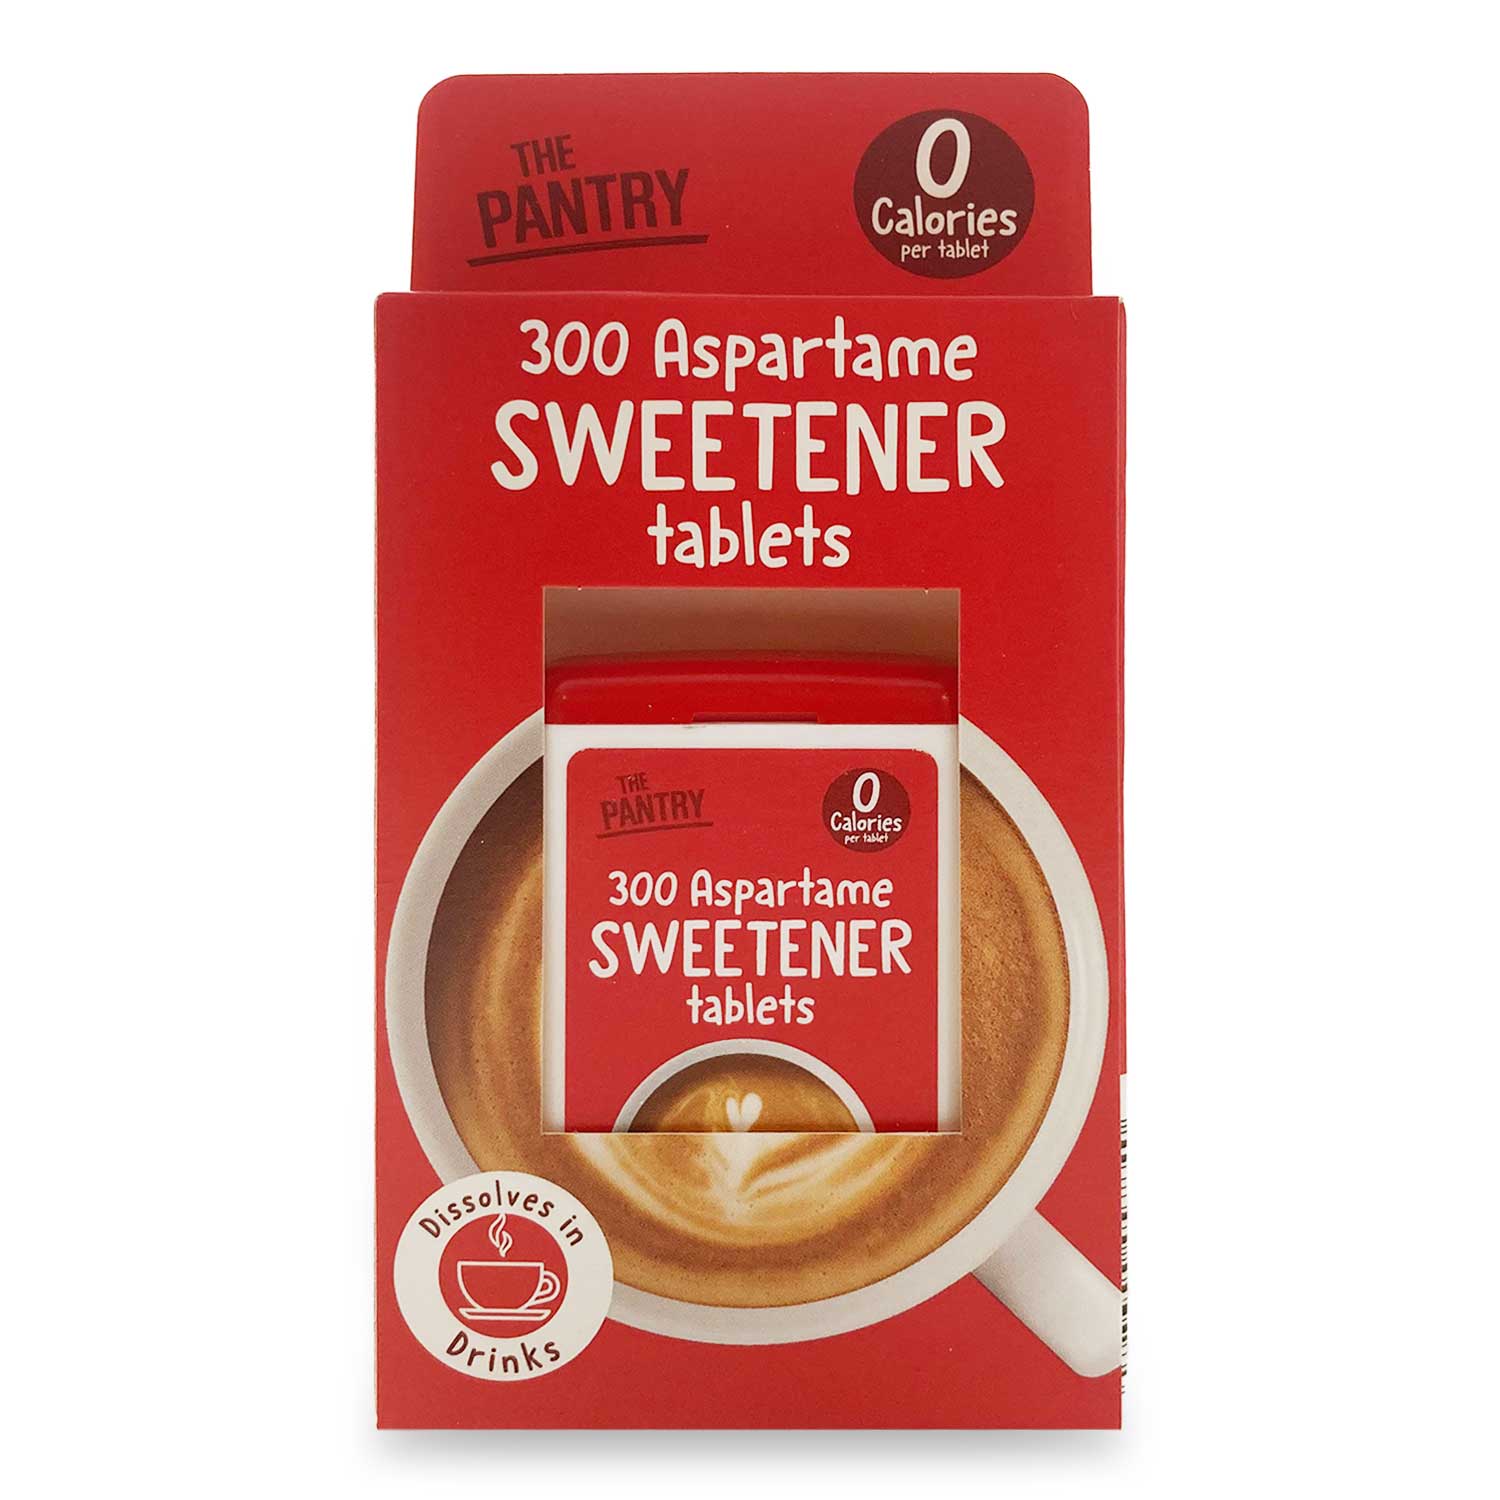 The Pantry Aspartame Sweetener Tablets 300 Pack